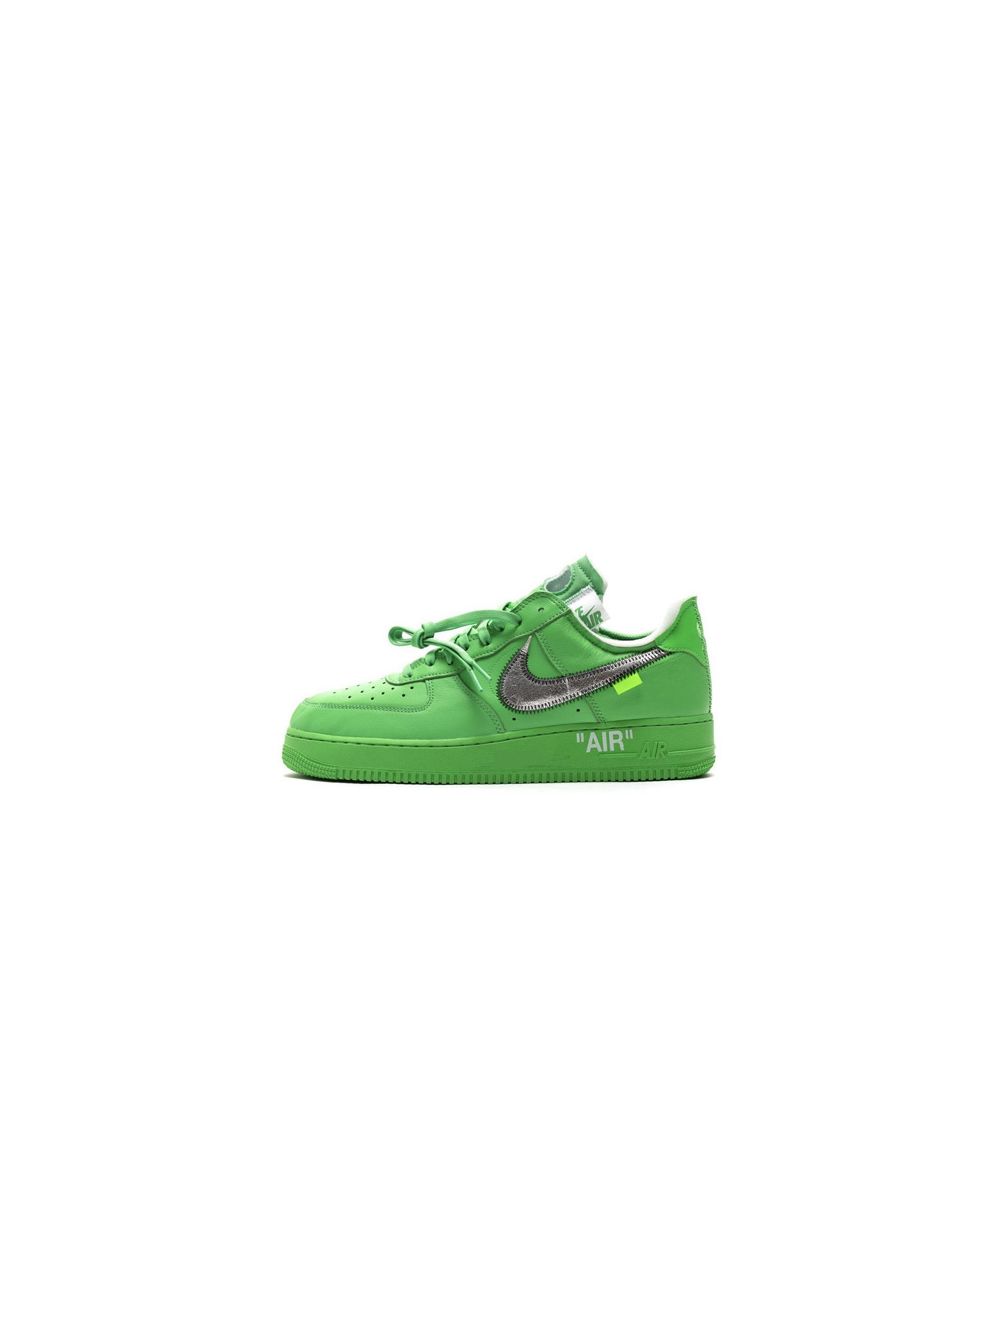 Best Fake Off-White x Air Force 1 Green For Sale